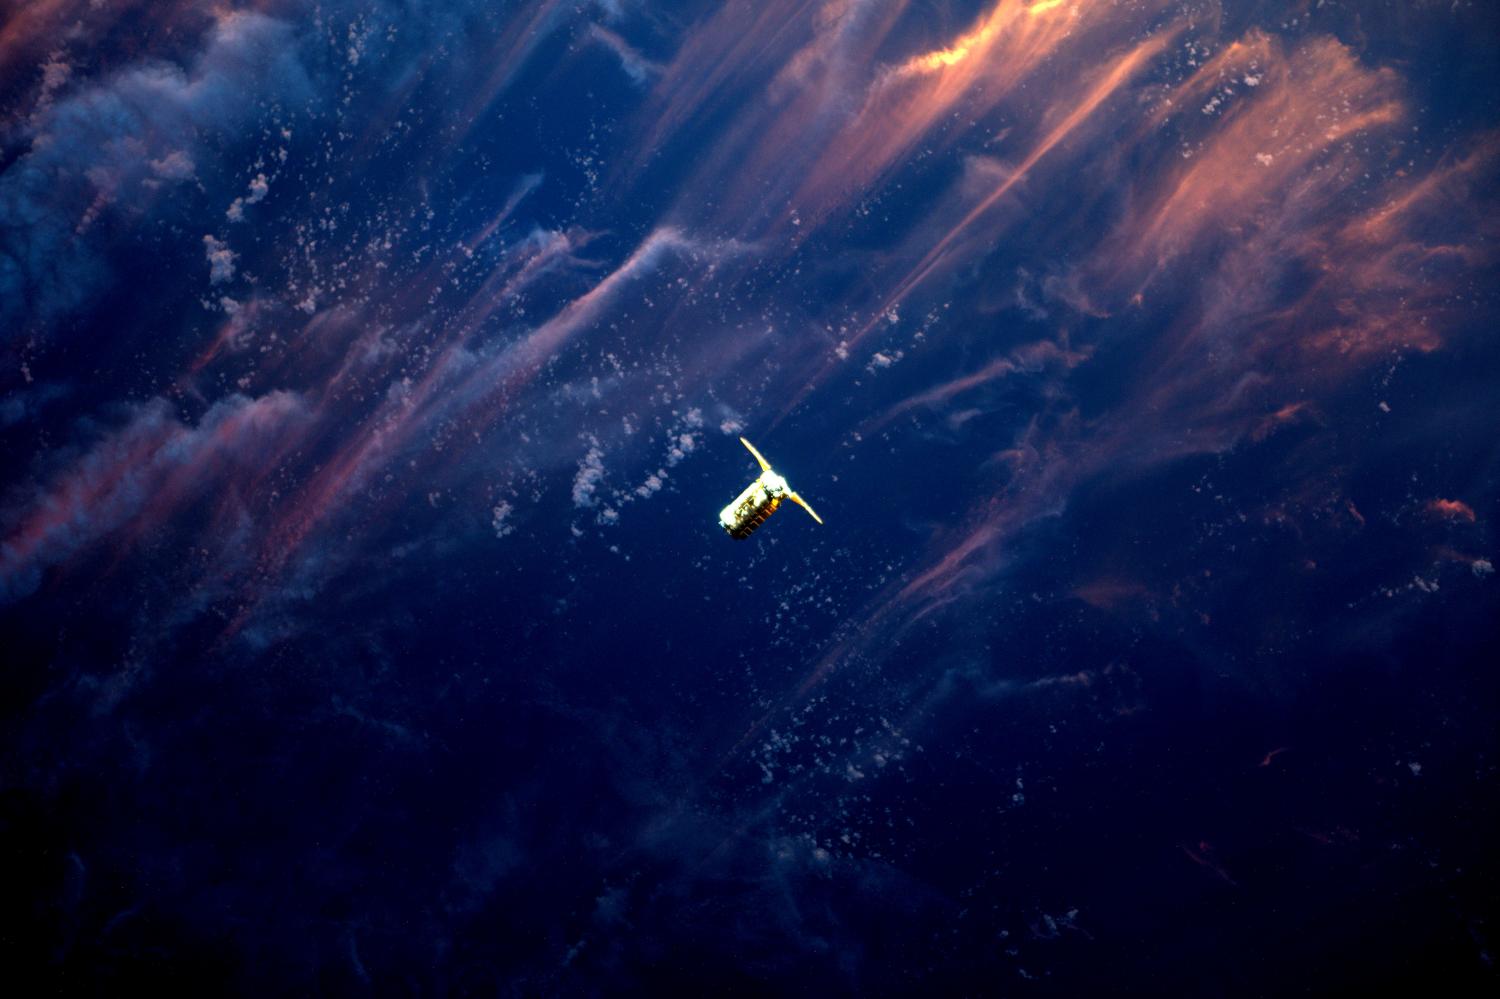 Expedition 51 Flight Engineer Thomas Pesquet of the European Space Agency photographed Orbital ATK's Cygnus spacecraft as it approached the International Space Station, April 22, 2017. Using the station's robotic Canadarm2, Cygnus was successfully captured by Pesquet and Commander Peggy Whitson at 6:05 a.m. EDT. The spacecrafts arrival brought more than 7,600 pounds of research and supplies to support Expedition 51 and 52.  NASA/ESA/Handout via REUTERS  ATTENTION EDITORS - THIS IMAGE WAS PROVIDED BY A THIRD PARTY - RC1C0F04C520